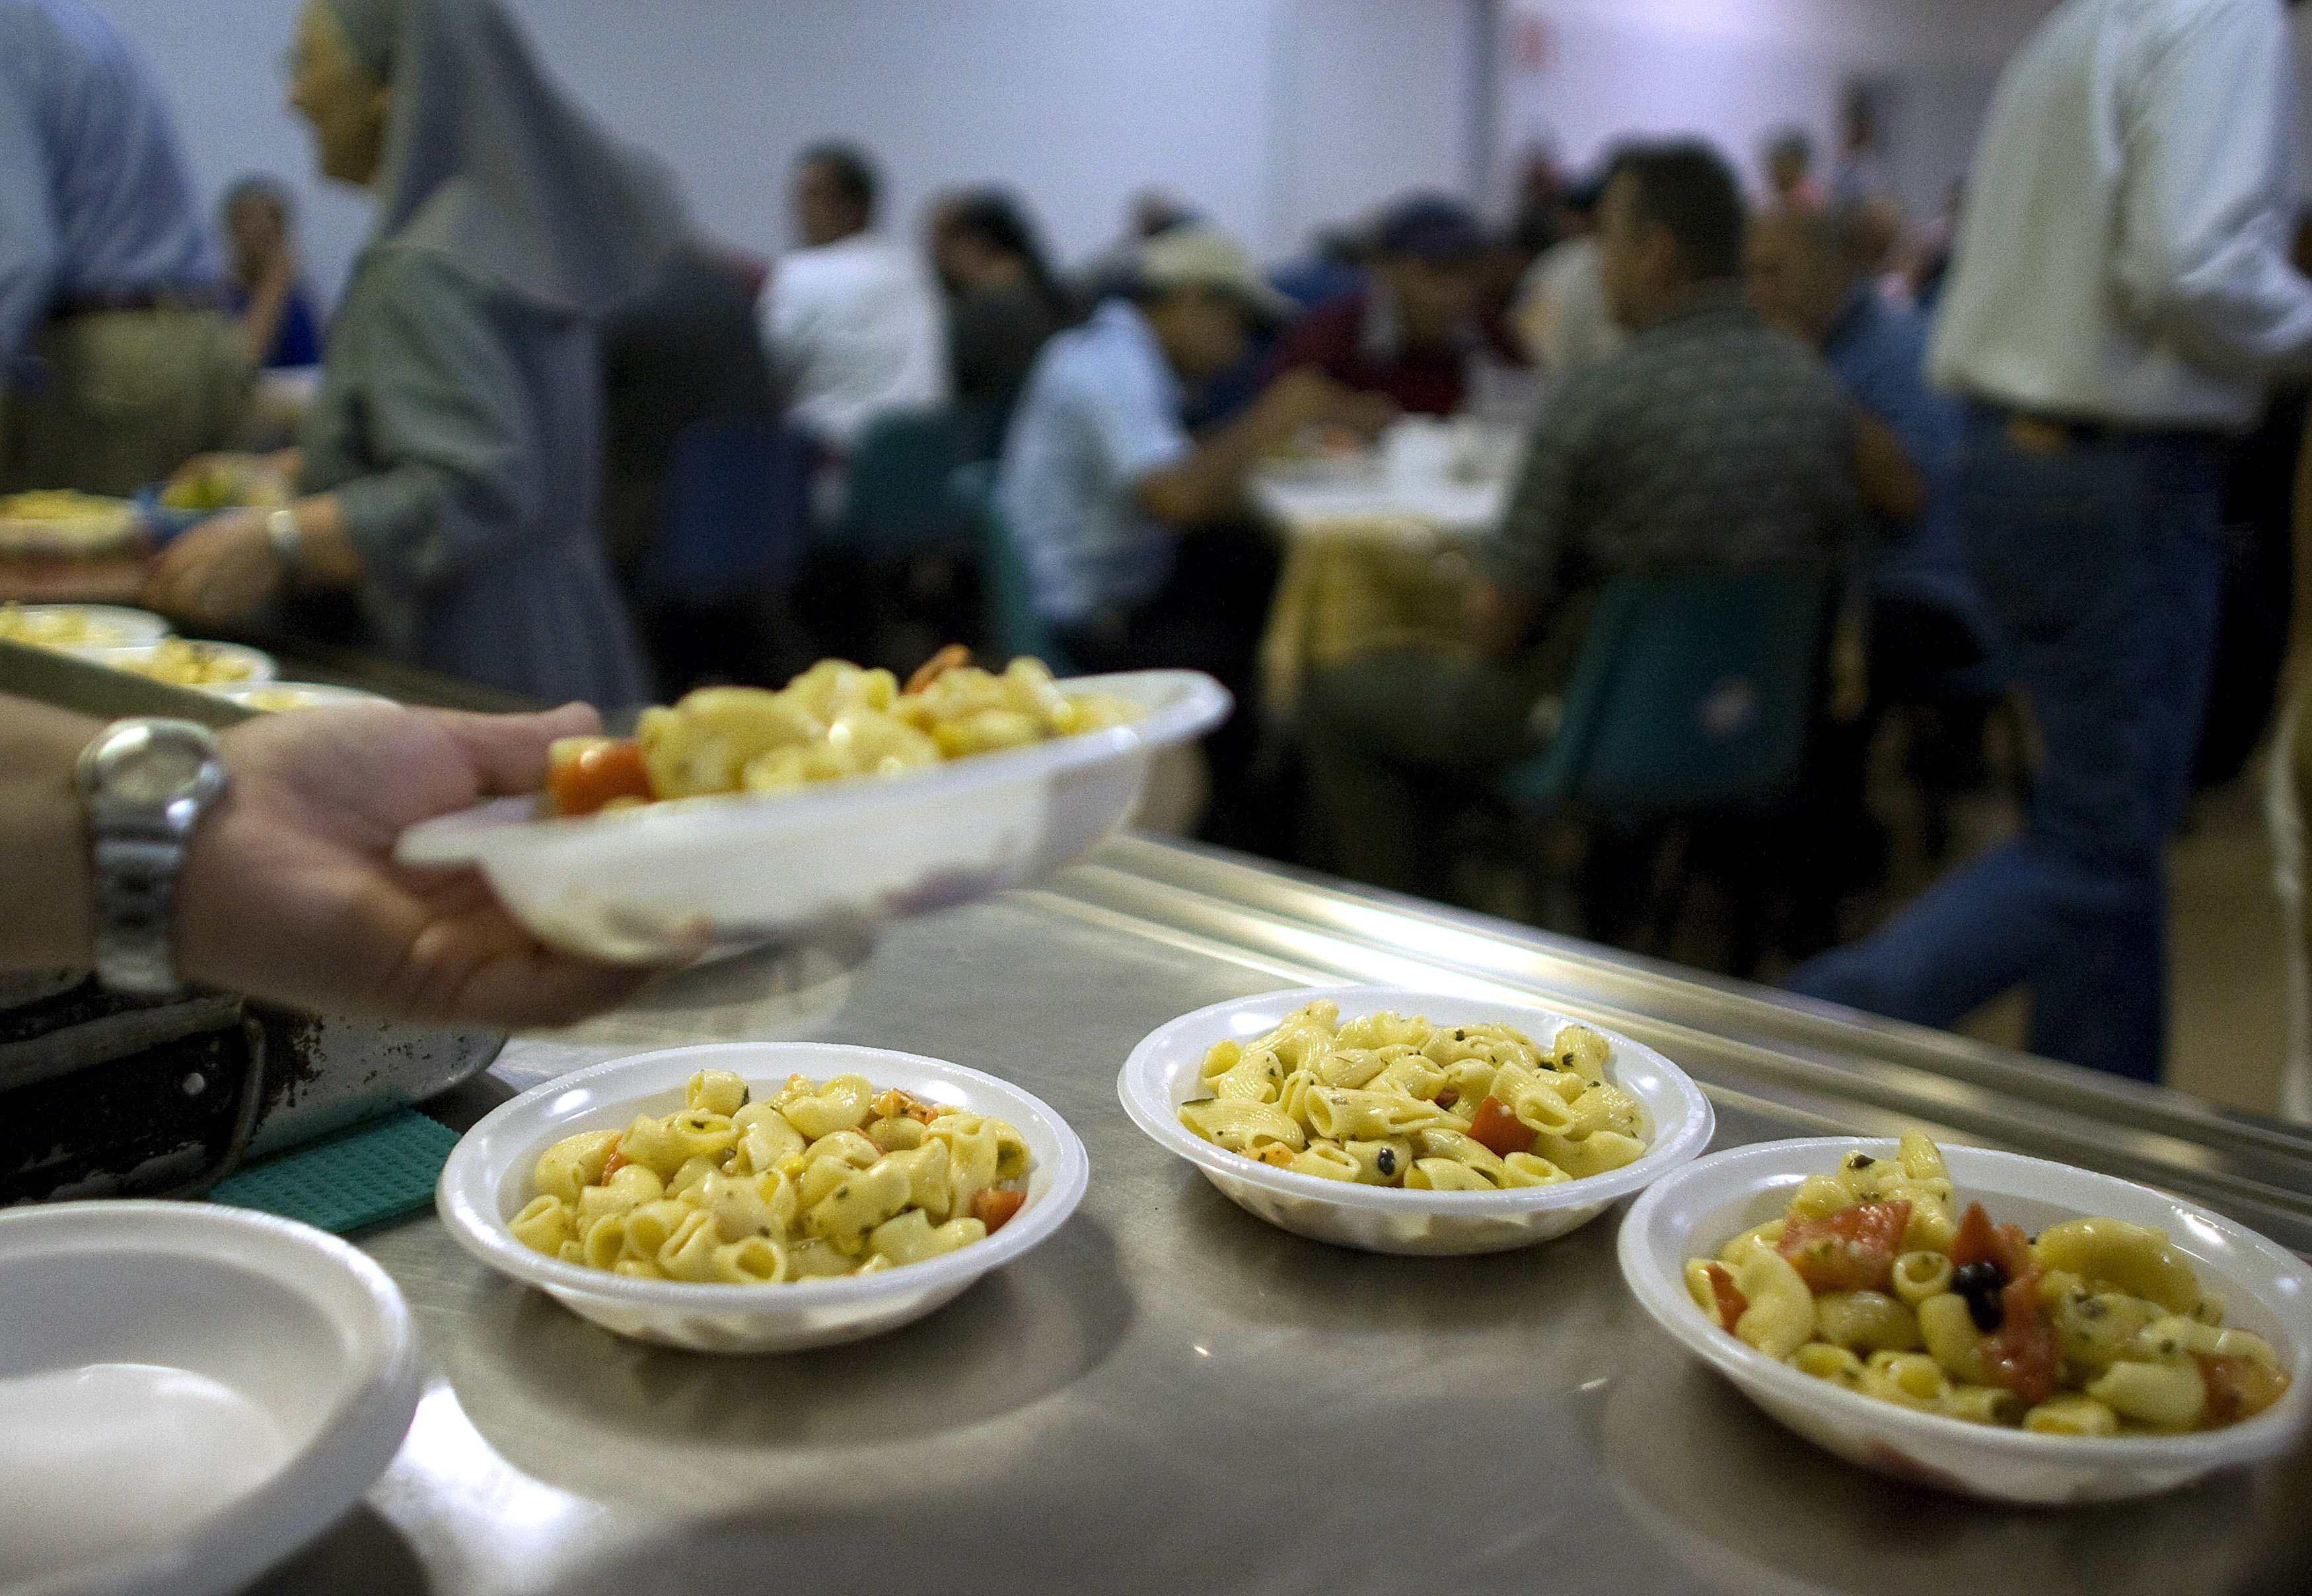 Free meals are served in a "soup kitchen" run by the Sant'Egidio Christian community in Rome September 17, 2008. The euro zone's third largest economy, Italy has been one of its most sluggish performers for more than a decade, and has suffered more than most of its partners from surging oil prices, a strong currency and the international slowdown. Statistics show that Italy is growing older and poorer while the economy underperforms its European peers.    To match feature FINANCIAL-ITALY/POOR     REUTERS/Tony Gentile        (ITALY)